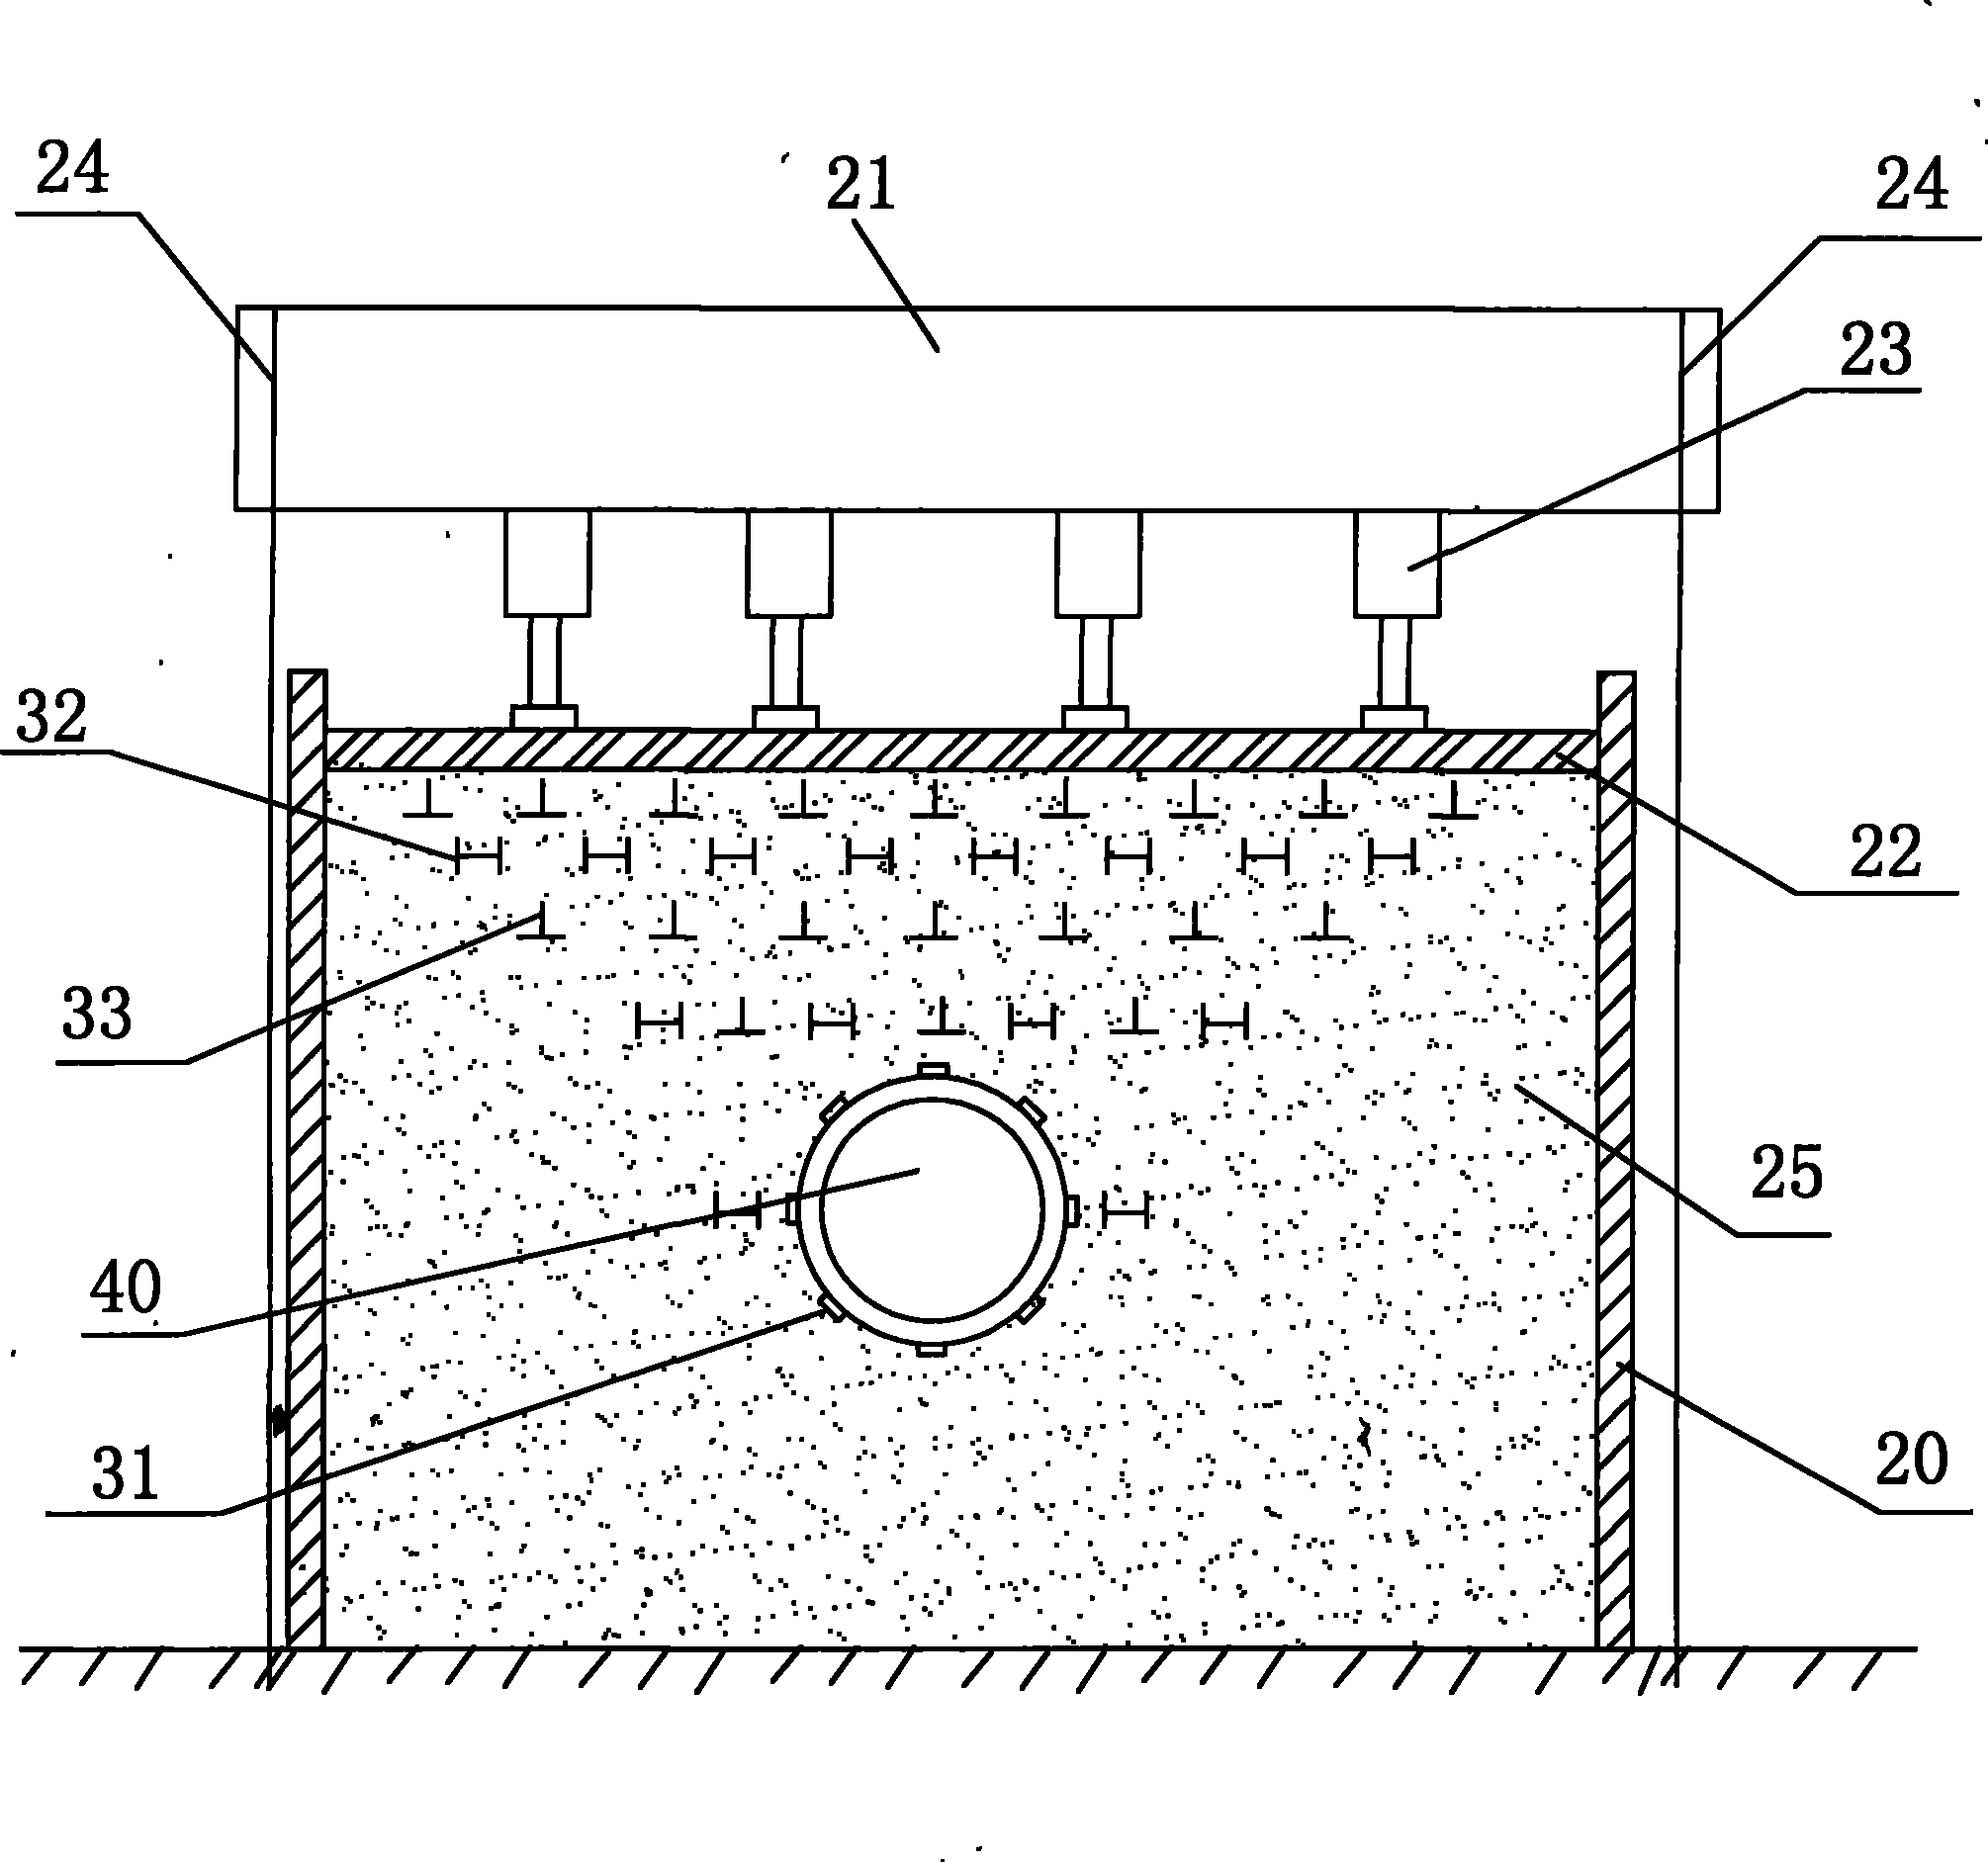 Soil pressure balancing type tunnel shielding simulation experiment system